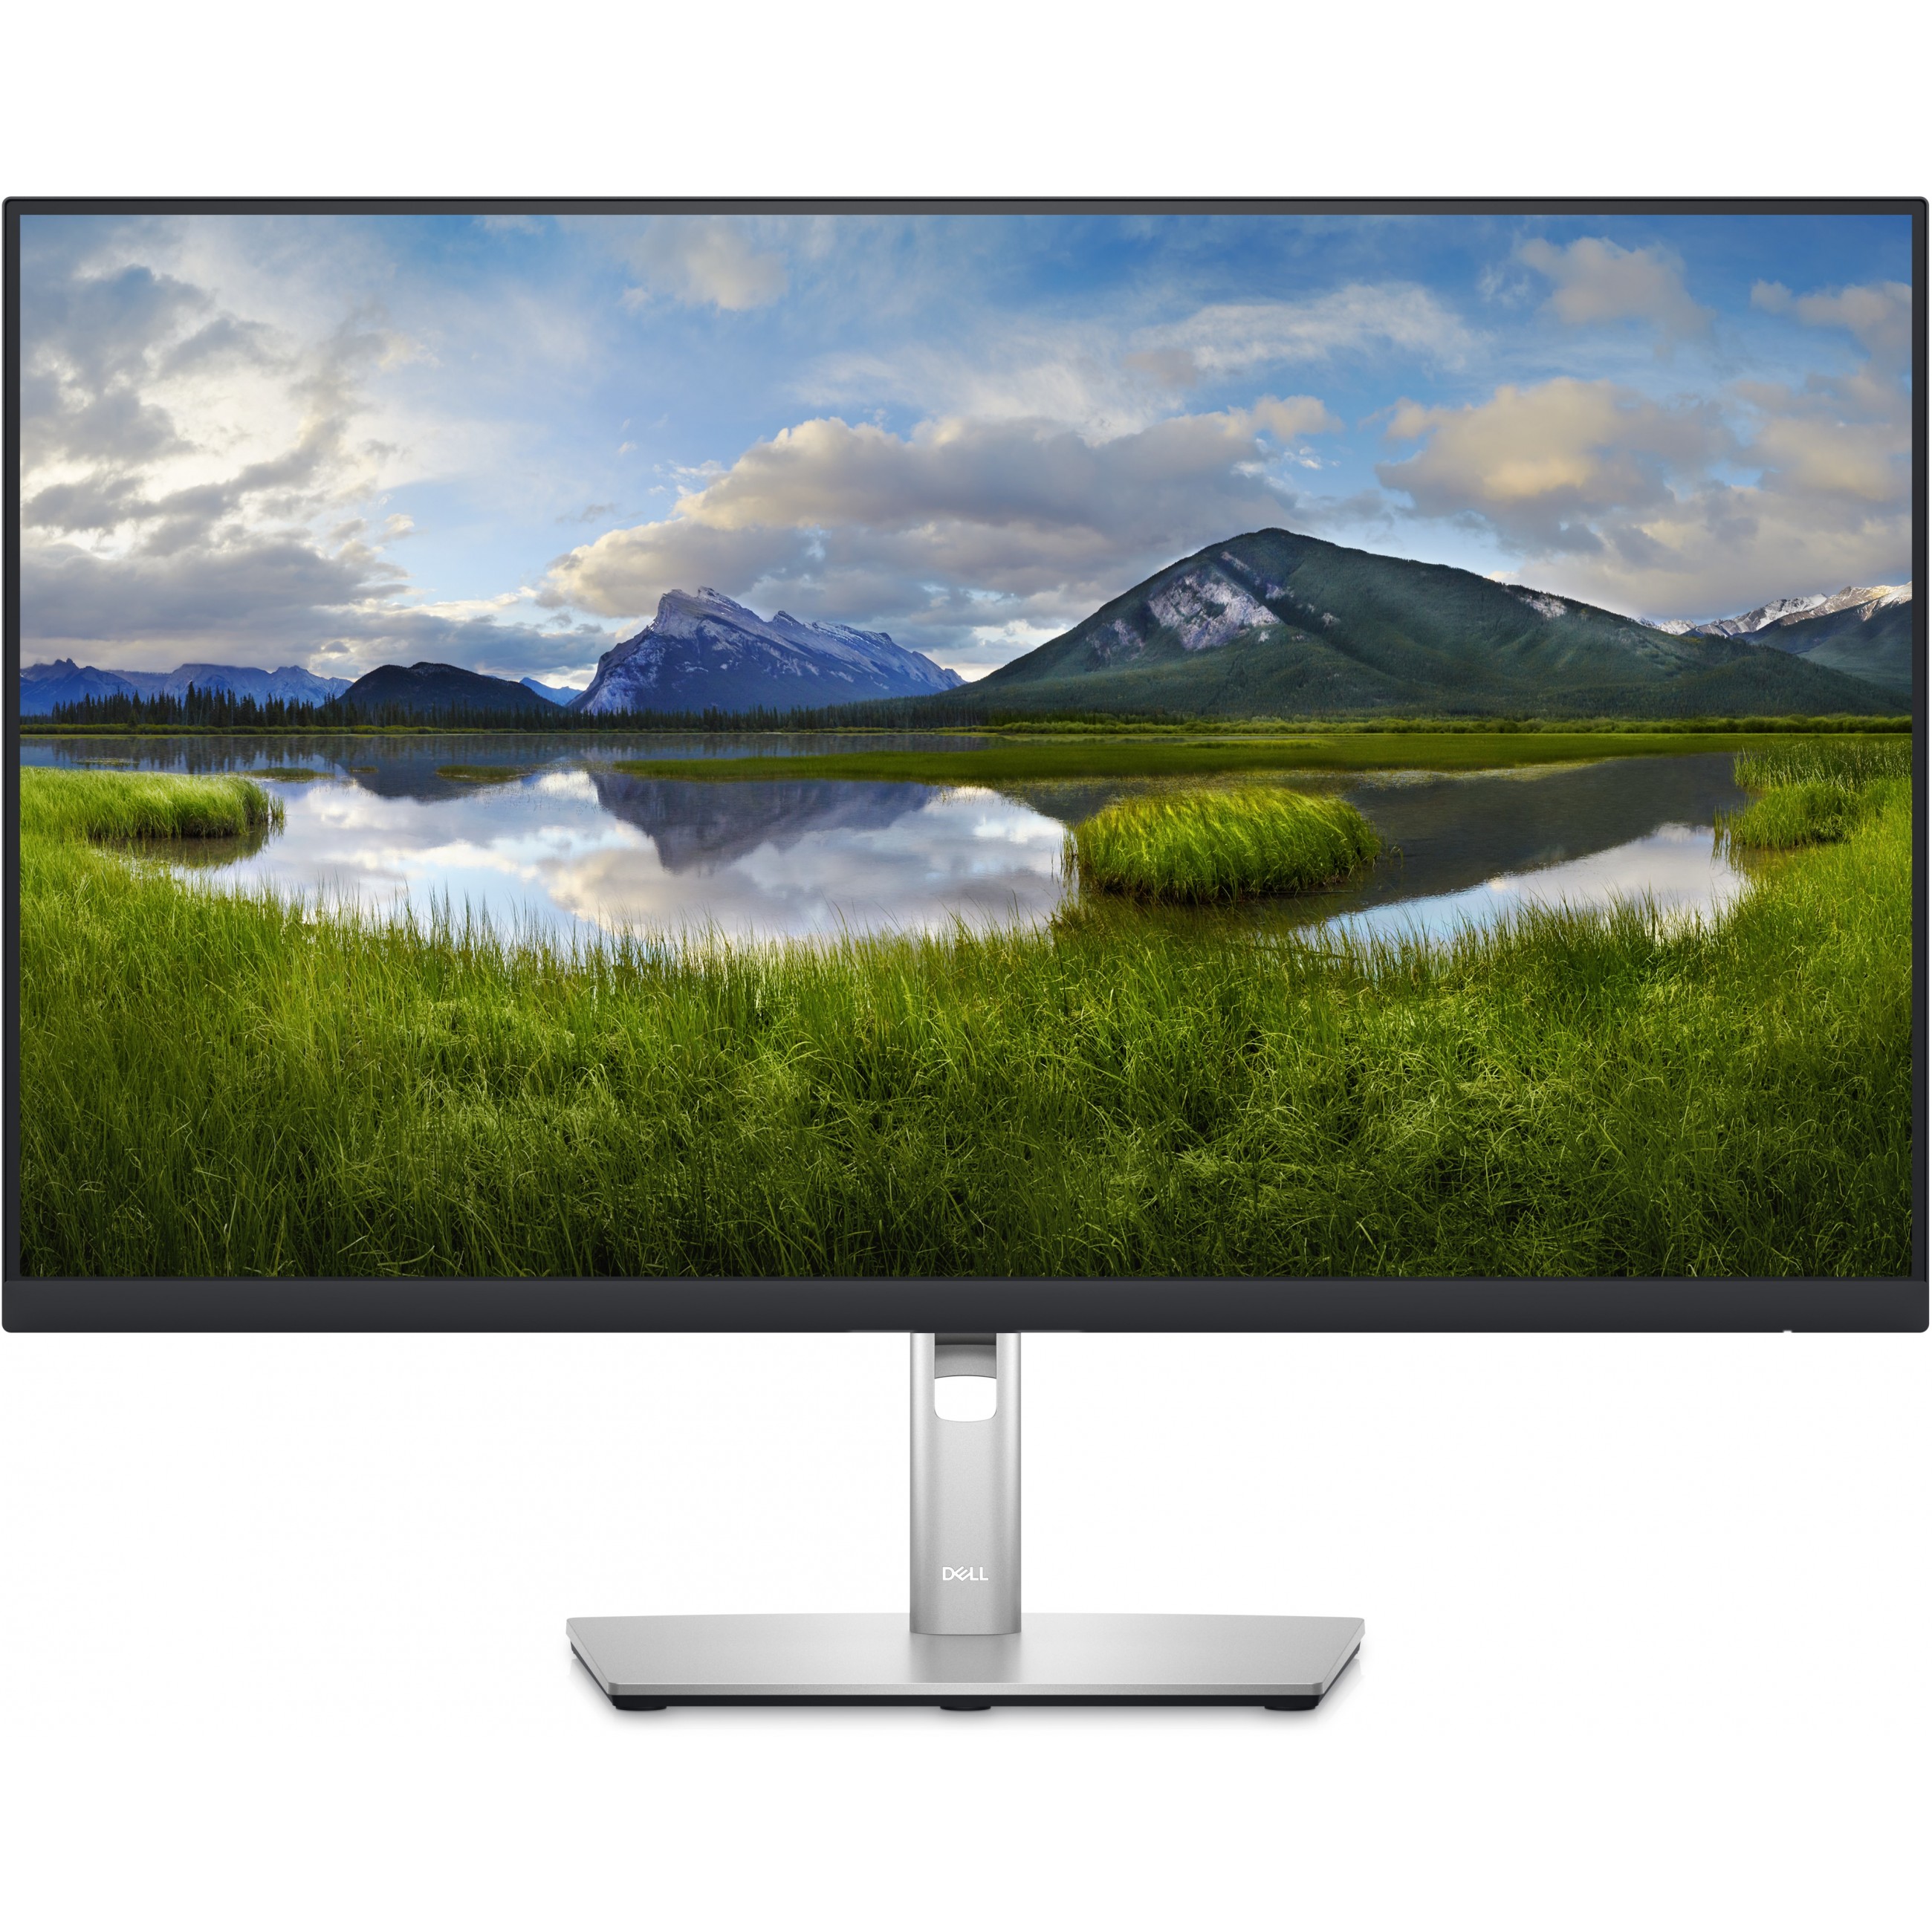 DELL P Series P2723D LED display - DELL-P2723D